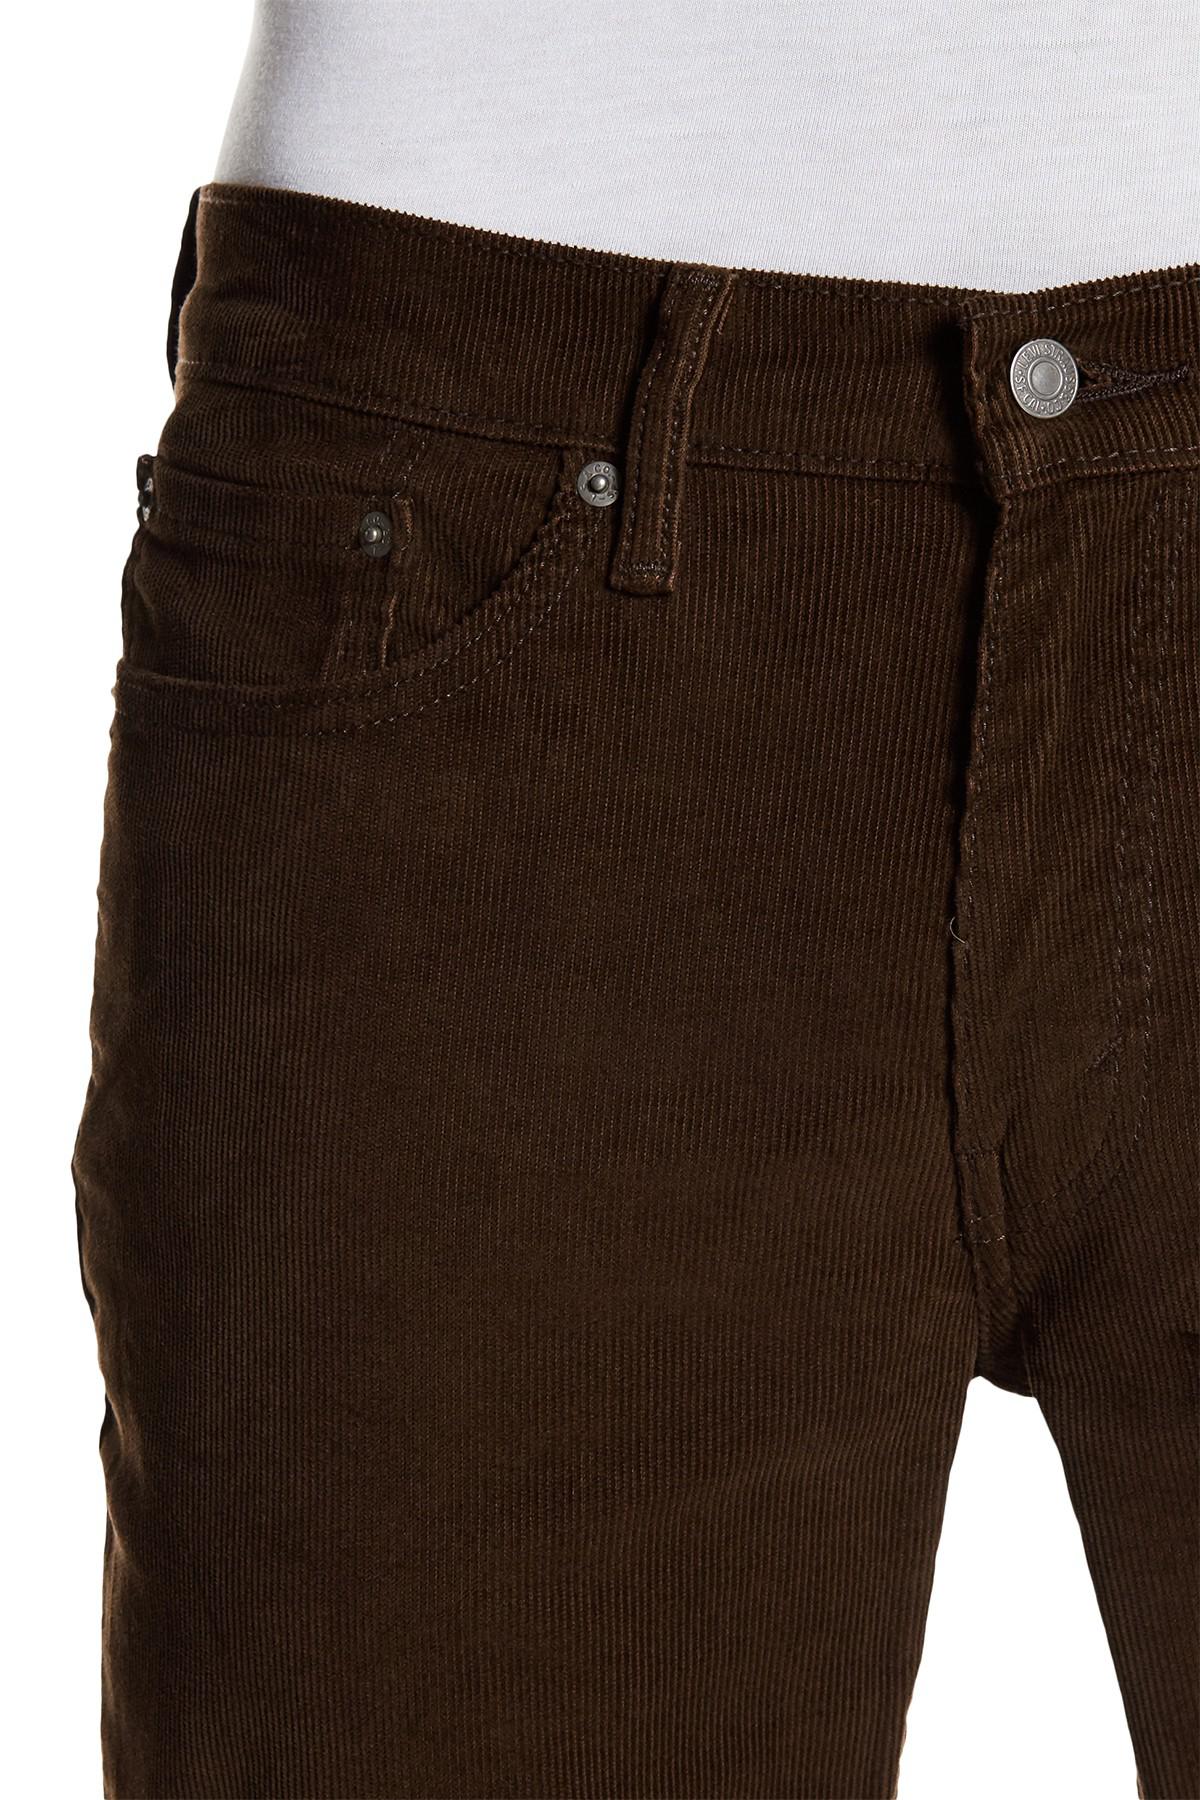 Levi's 514 Straight Leg Compost Corduroy Pants in Brown for Men - Lyst